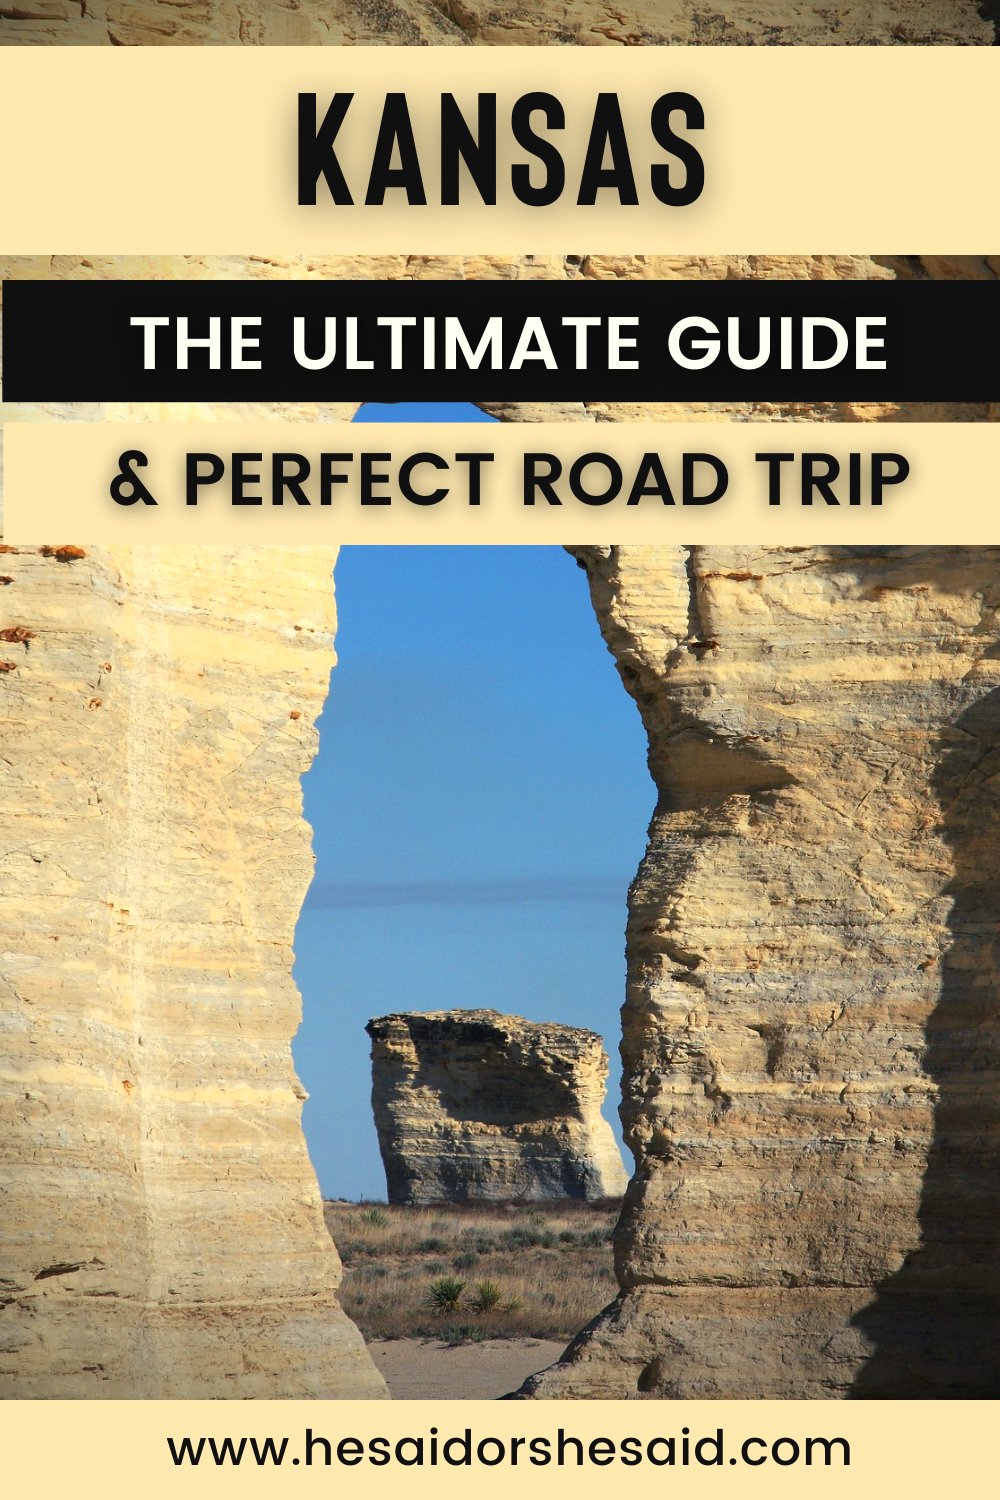 Kansas The Ultimate Travel Guide by hesaidorshesaid